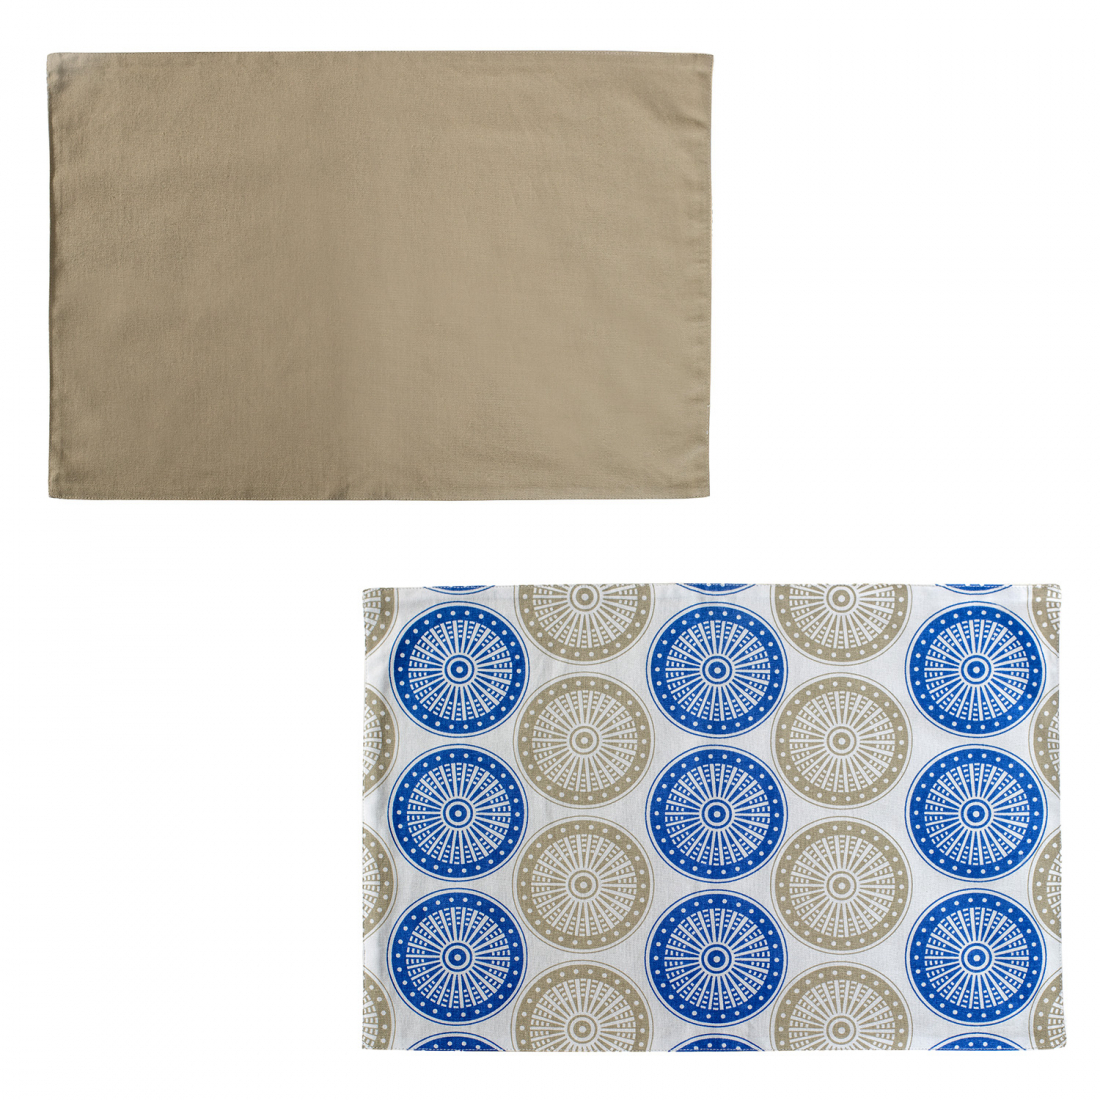 Provenza 2 Placemats